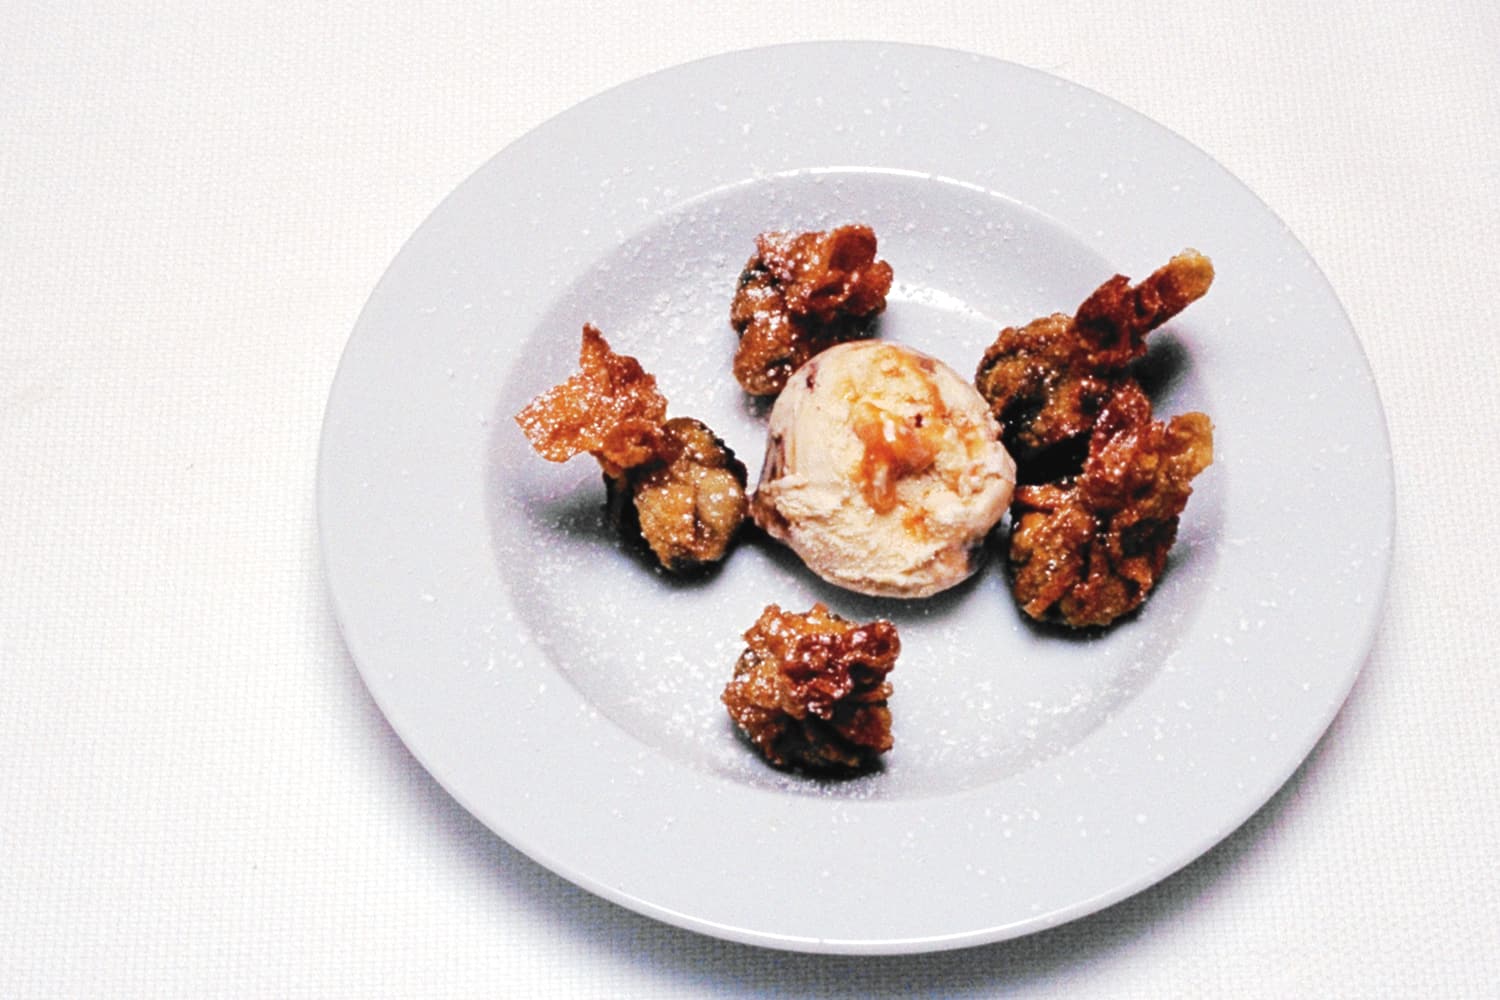 Mincemeat in Wantons with Icecream